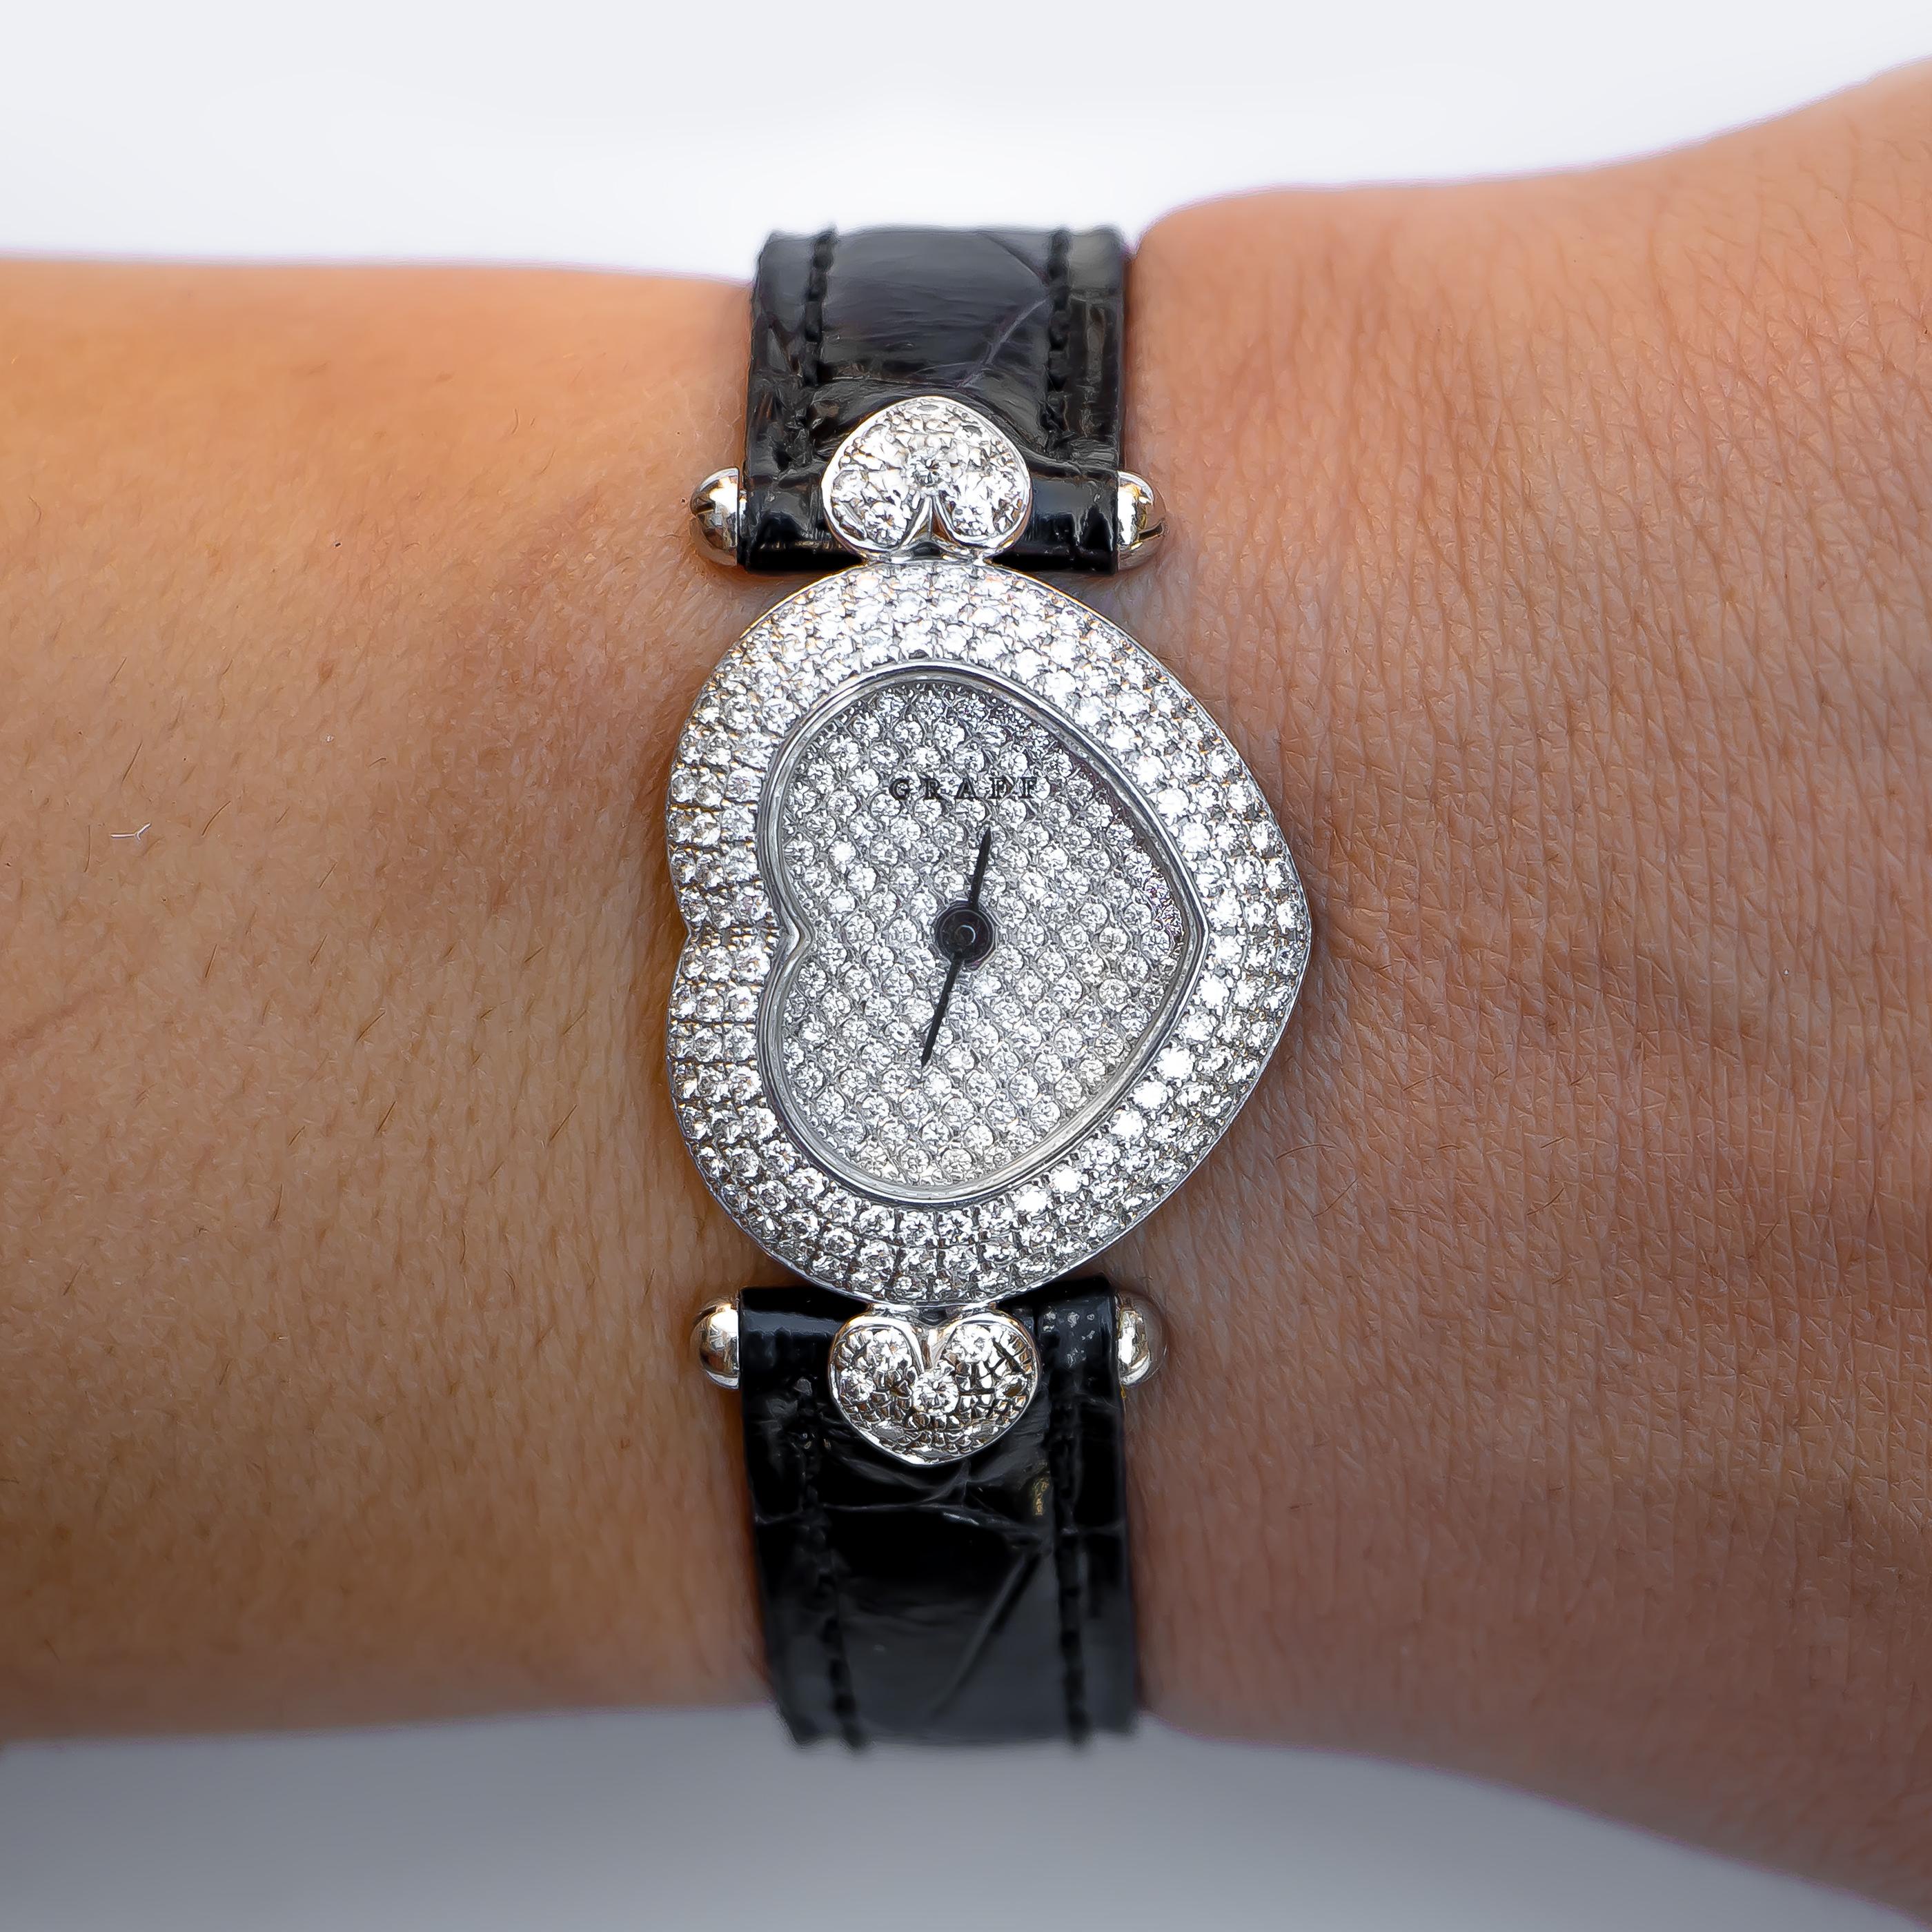 Graff London Limited Edition Diamond Heart Shape Casse Ladies Wristwatch

Brand: Graff London

Diamonds: 2.80 Carats
Color: F, Clarity: VS

Metal: 18K White Gold 

Bracelet: Authentic Graff Genuine Aligator 

Condition: Great (Previously Owned)

New